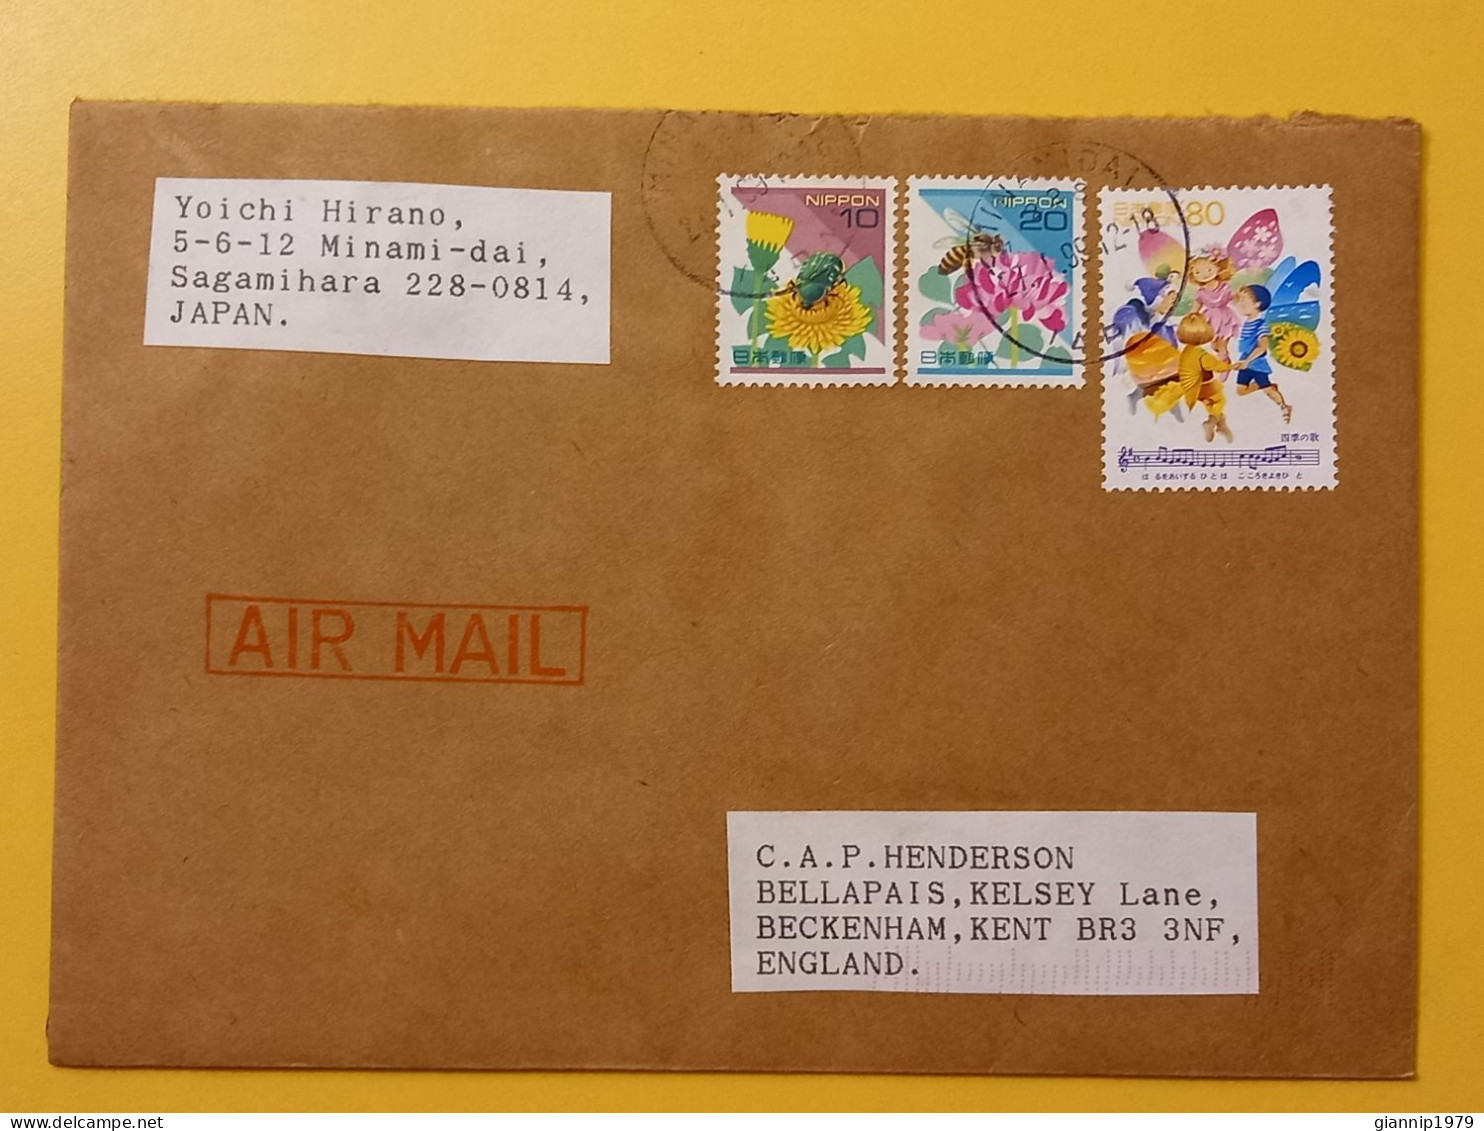 1999 BUSTA COVER AIR MAIL GIAPPONE JAPAN NIPPON BOLLO FIORI FLOWERS OBLITERE'  FOR ENGLAND - Covers & Documents